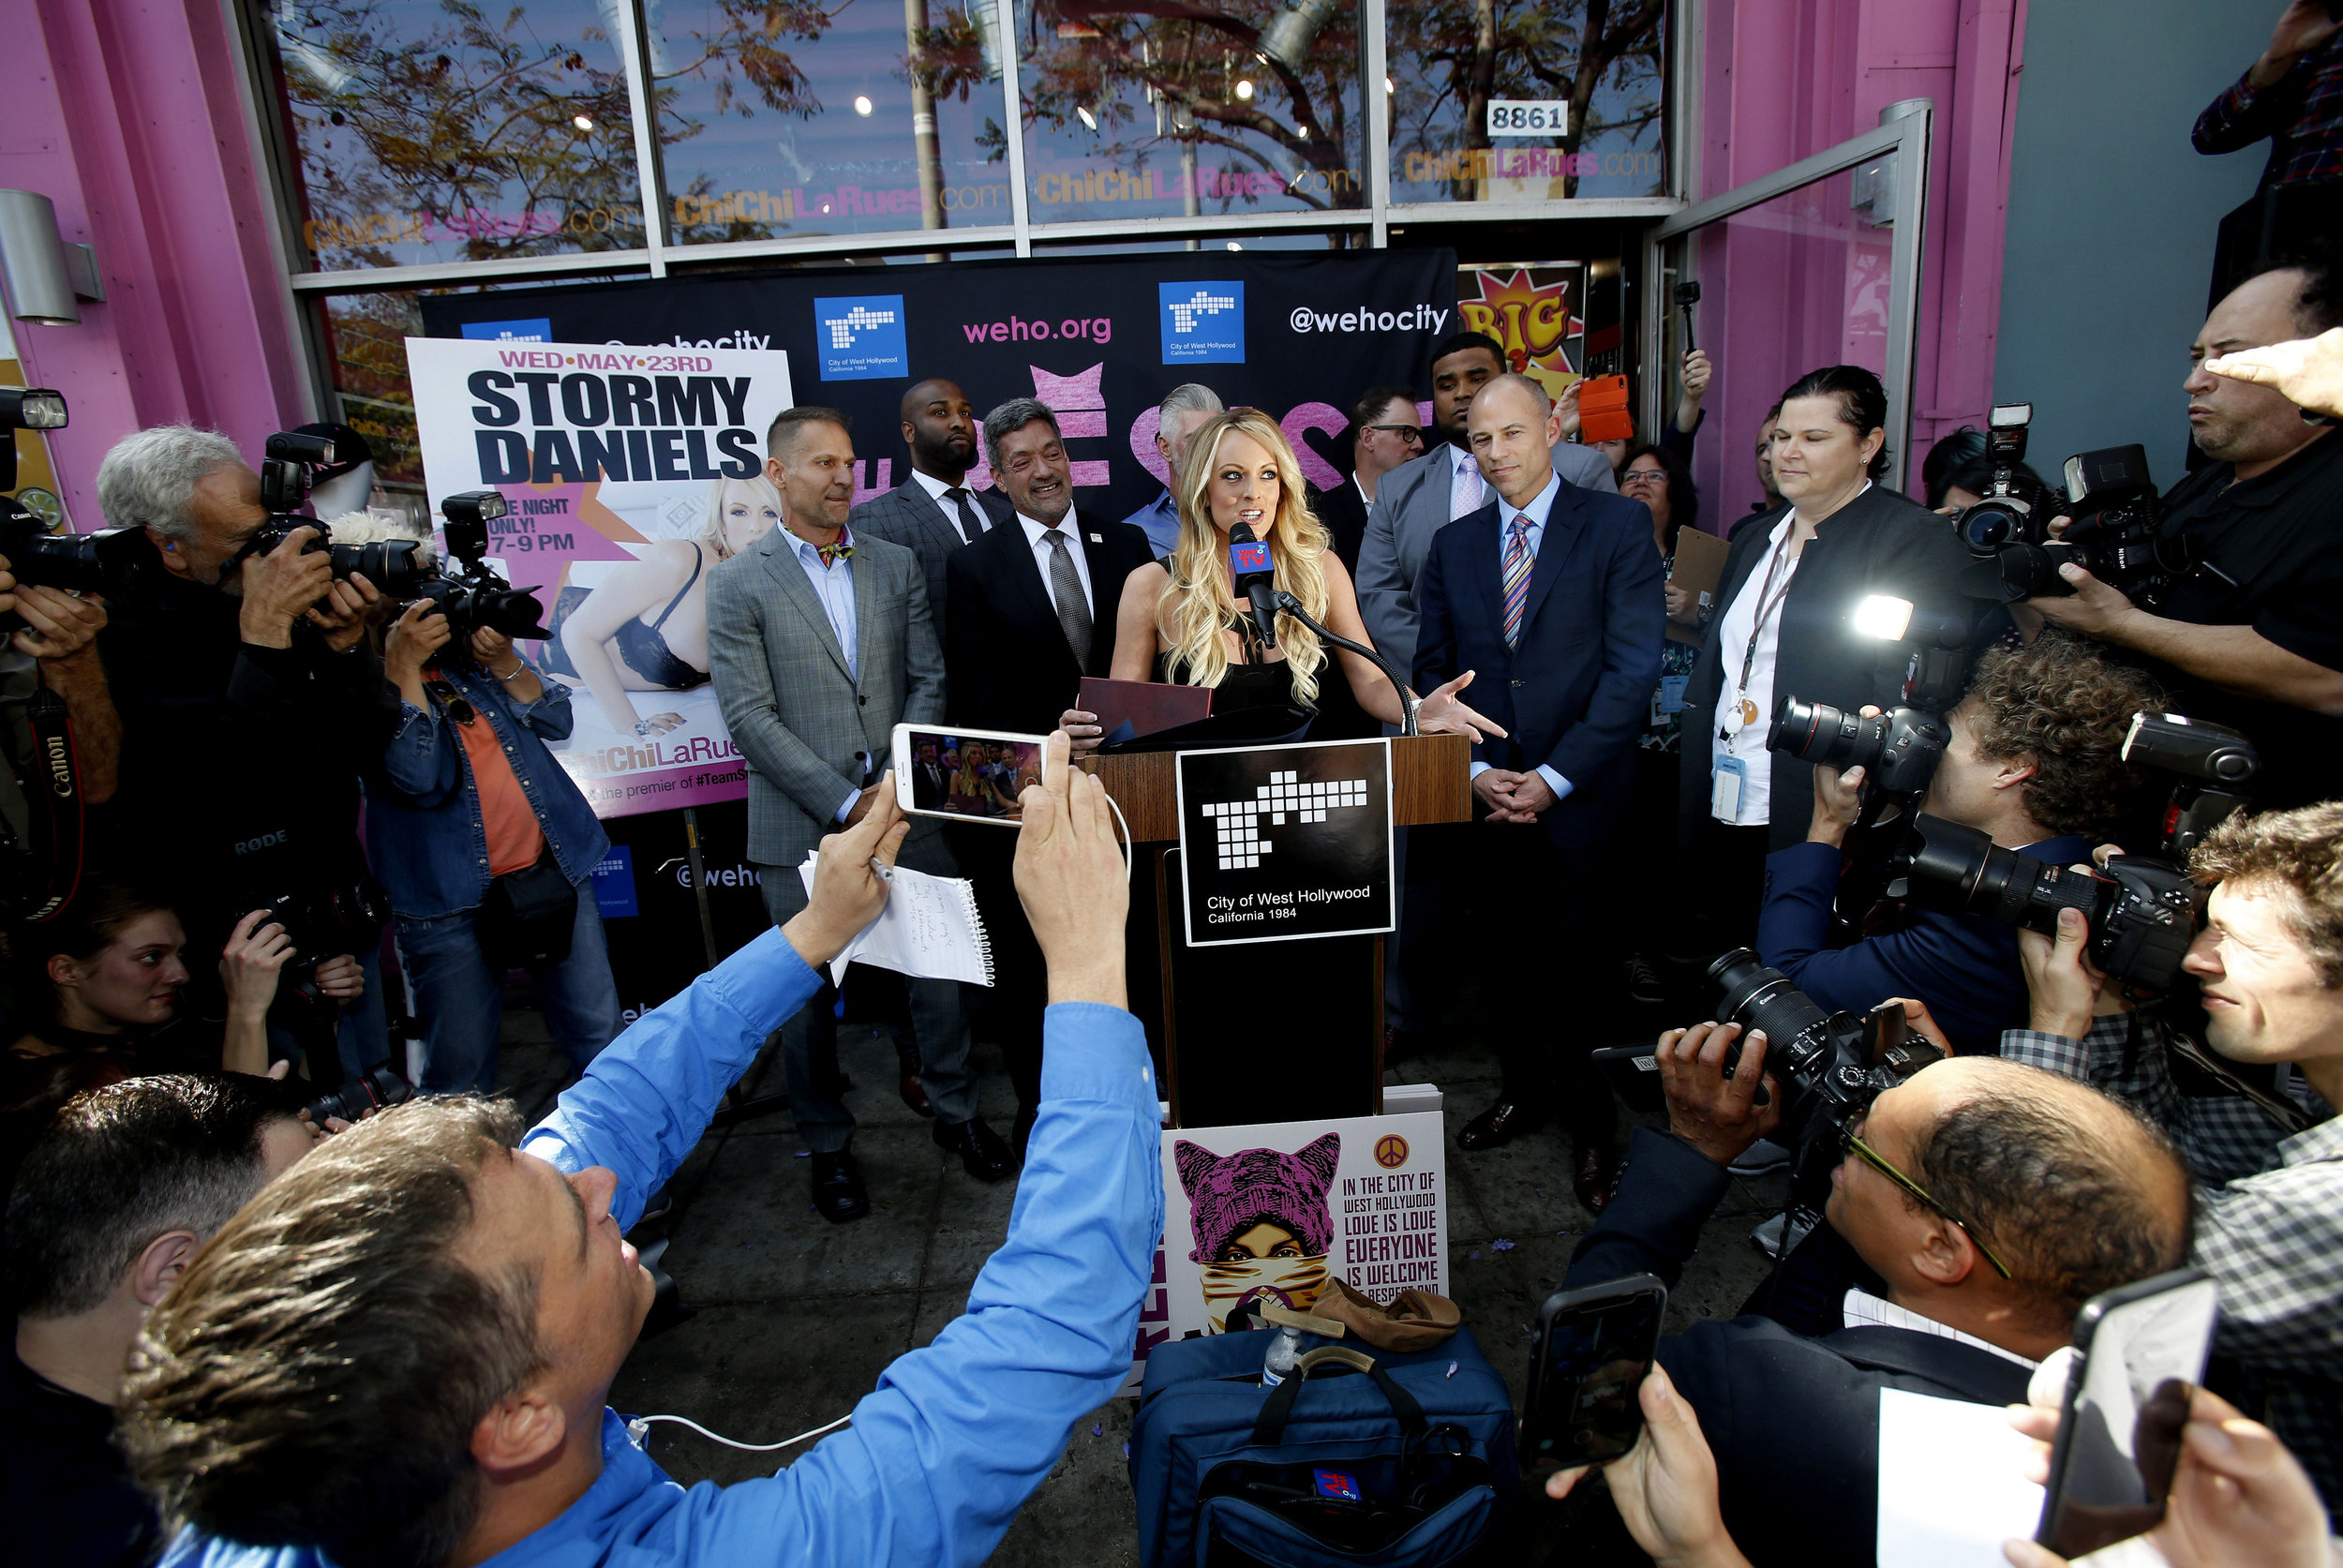  Stormy Daniels, center, speaks during a ceremony for her receiving a City Proclamation and Key to the City on Wednesday, May 23, 2018 in West Hollywood, Calif. 